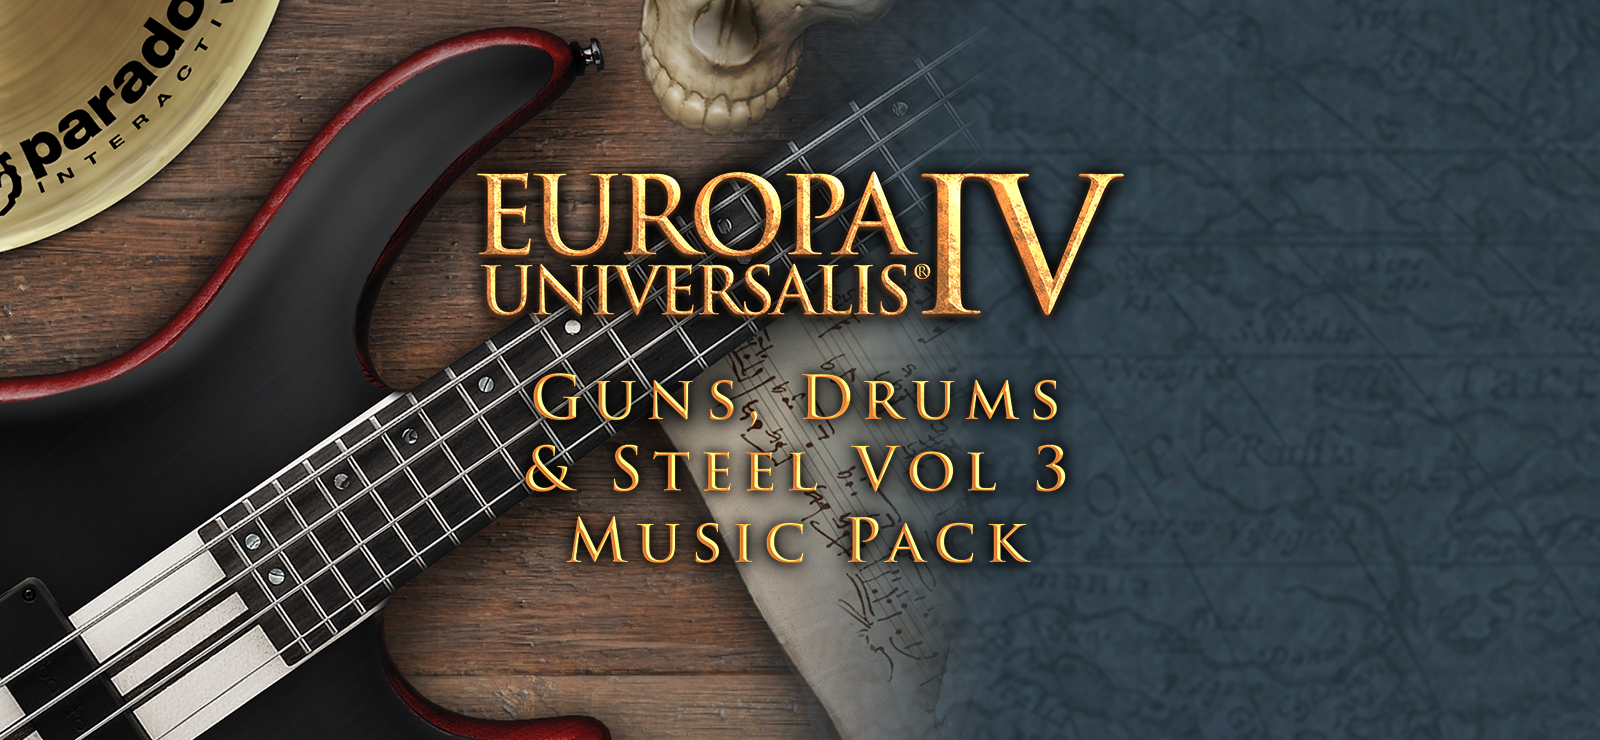 Europa Universalis IV: Guns, Drums And Steel Volume 3 Music Pack